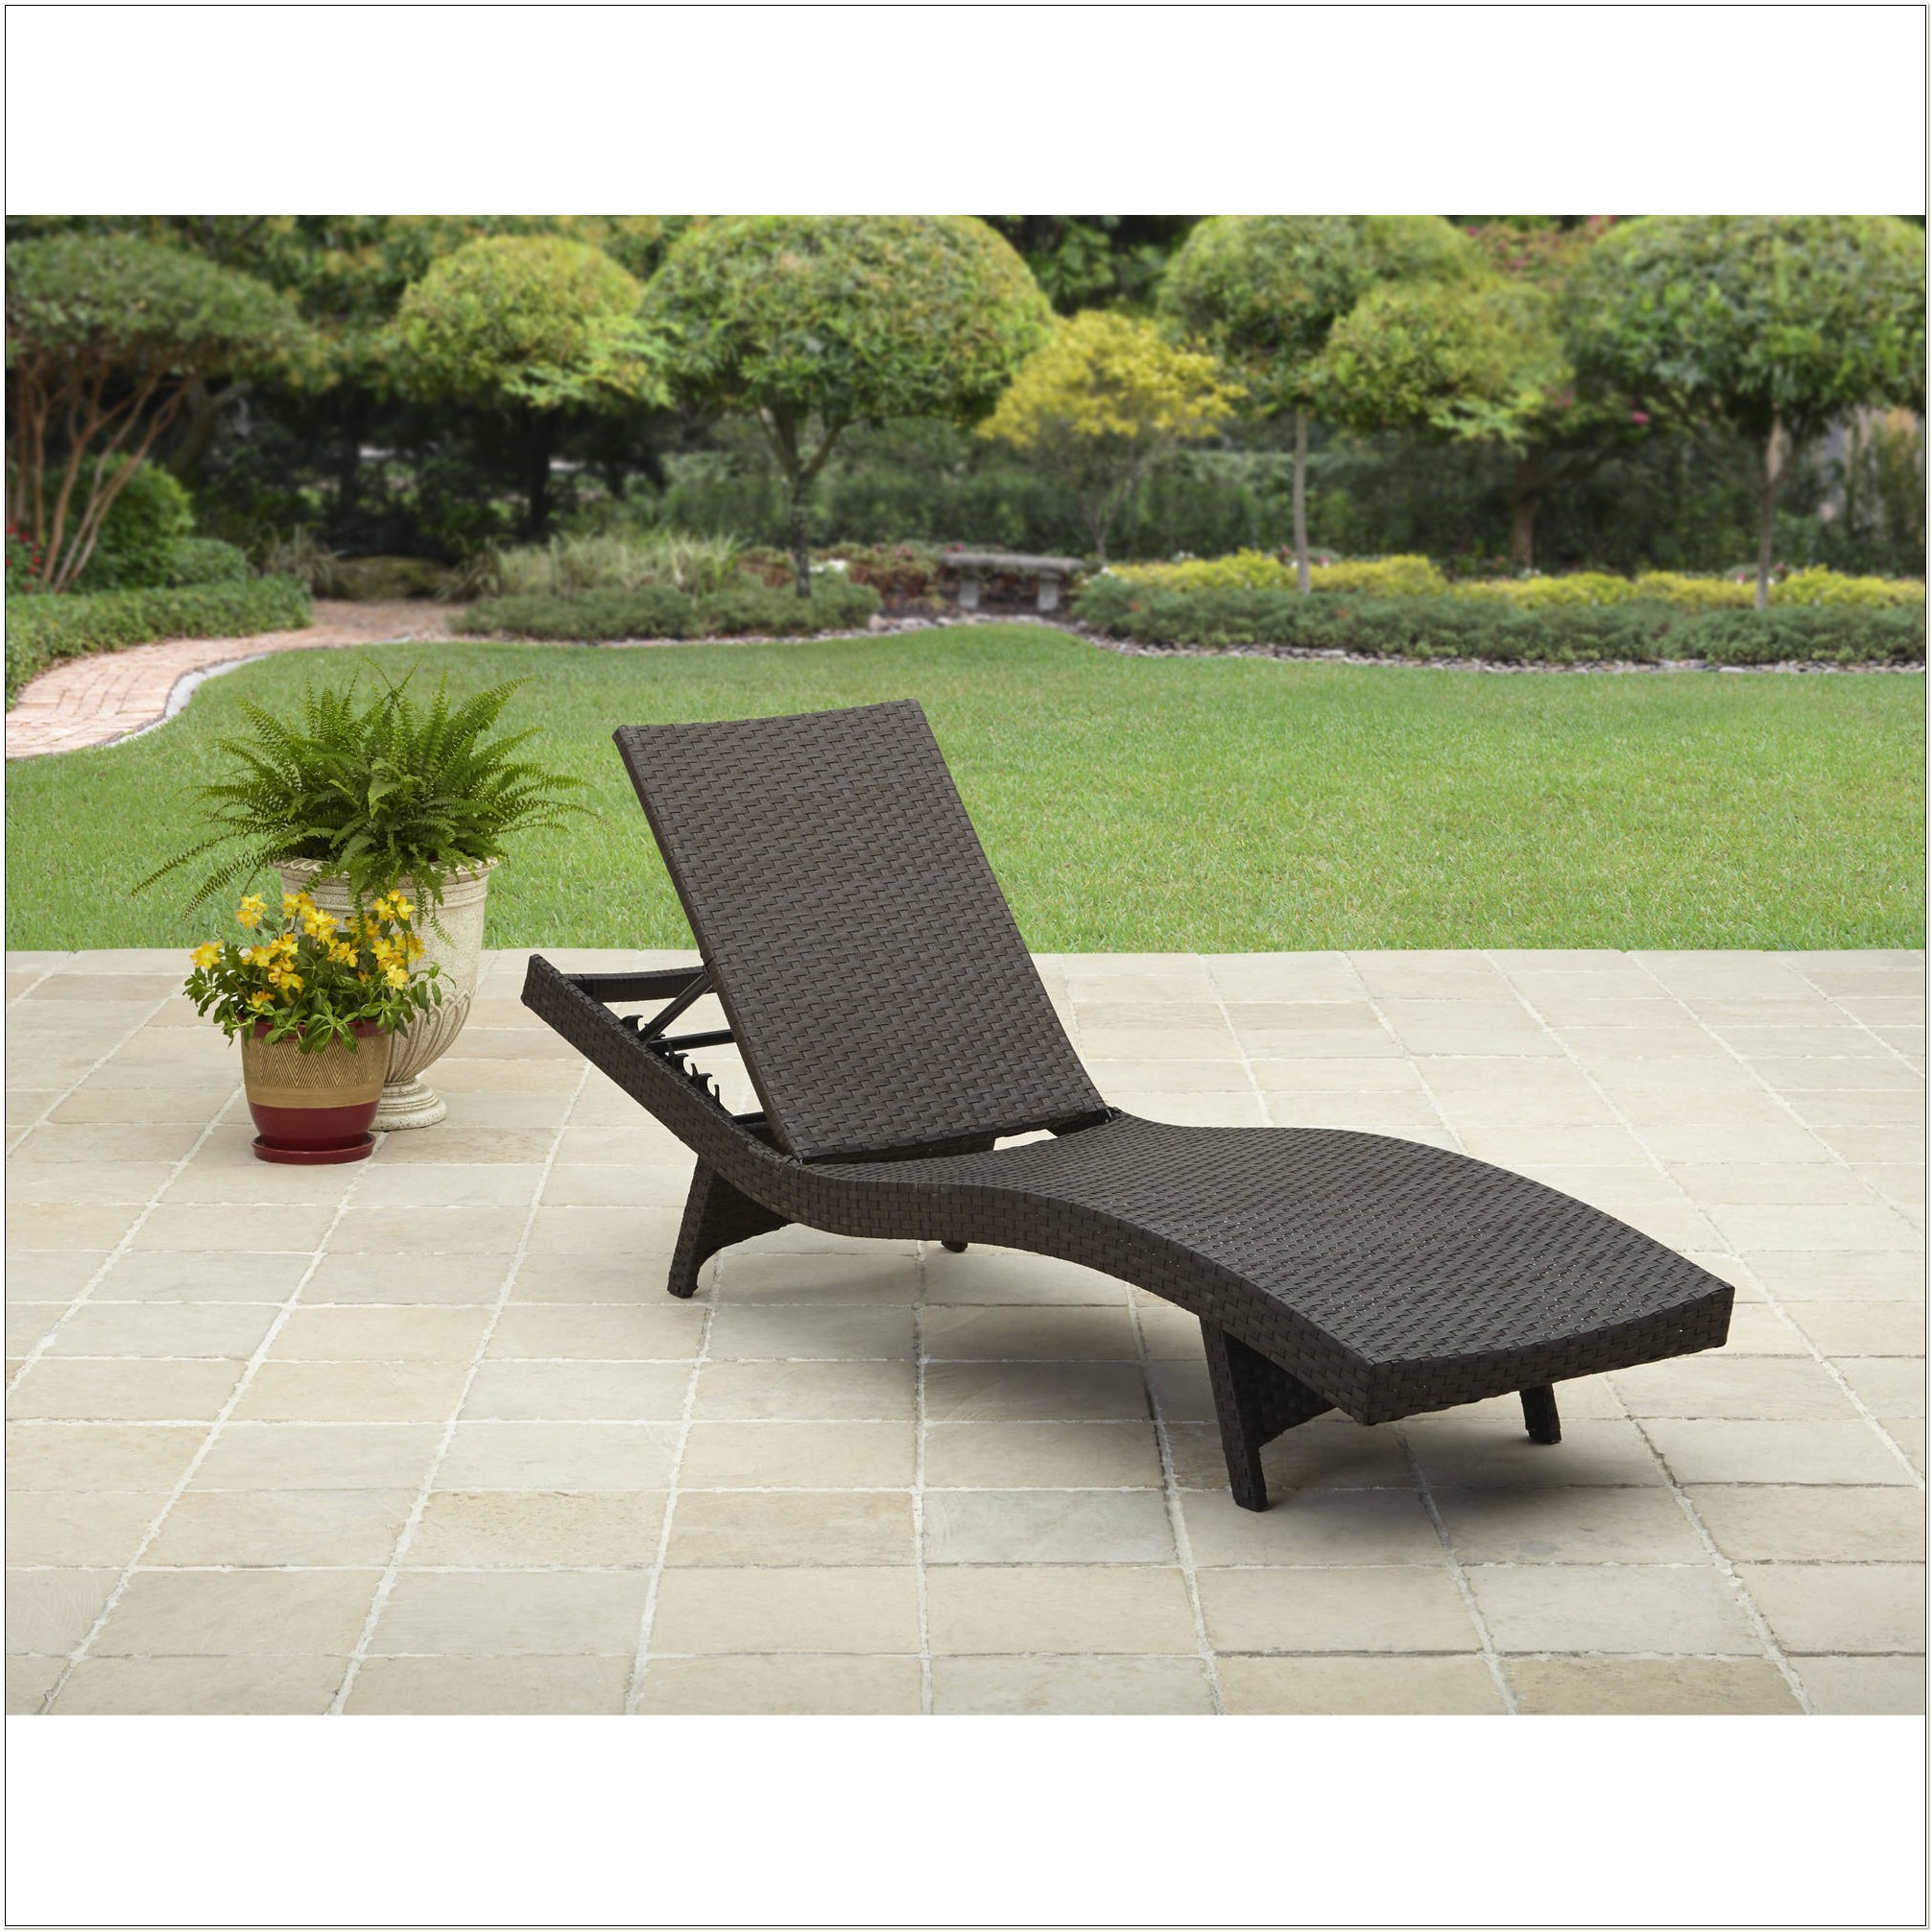 Walmart Outdoor Chaise Lounge Chairs - Chairs : Home Decorating Ideas #